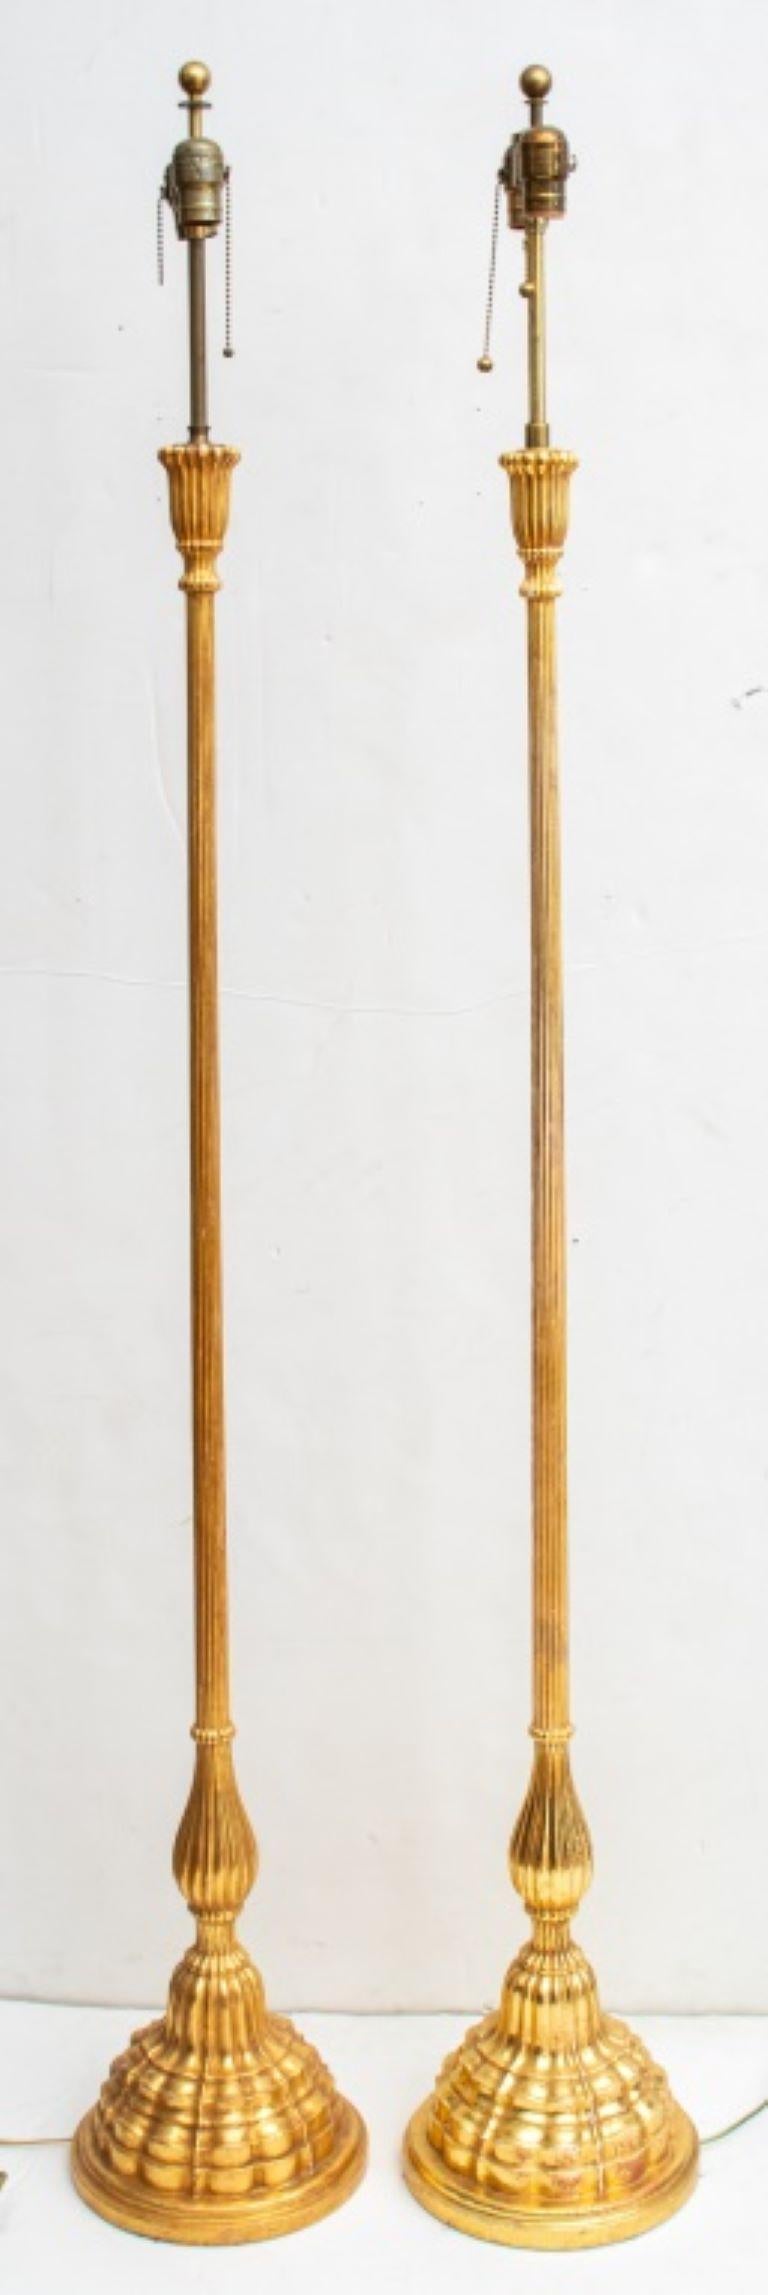 Neoclassical Gilt Composition Floor Lamps, Pair For Sale 2